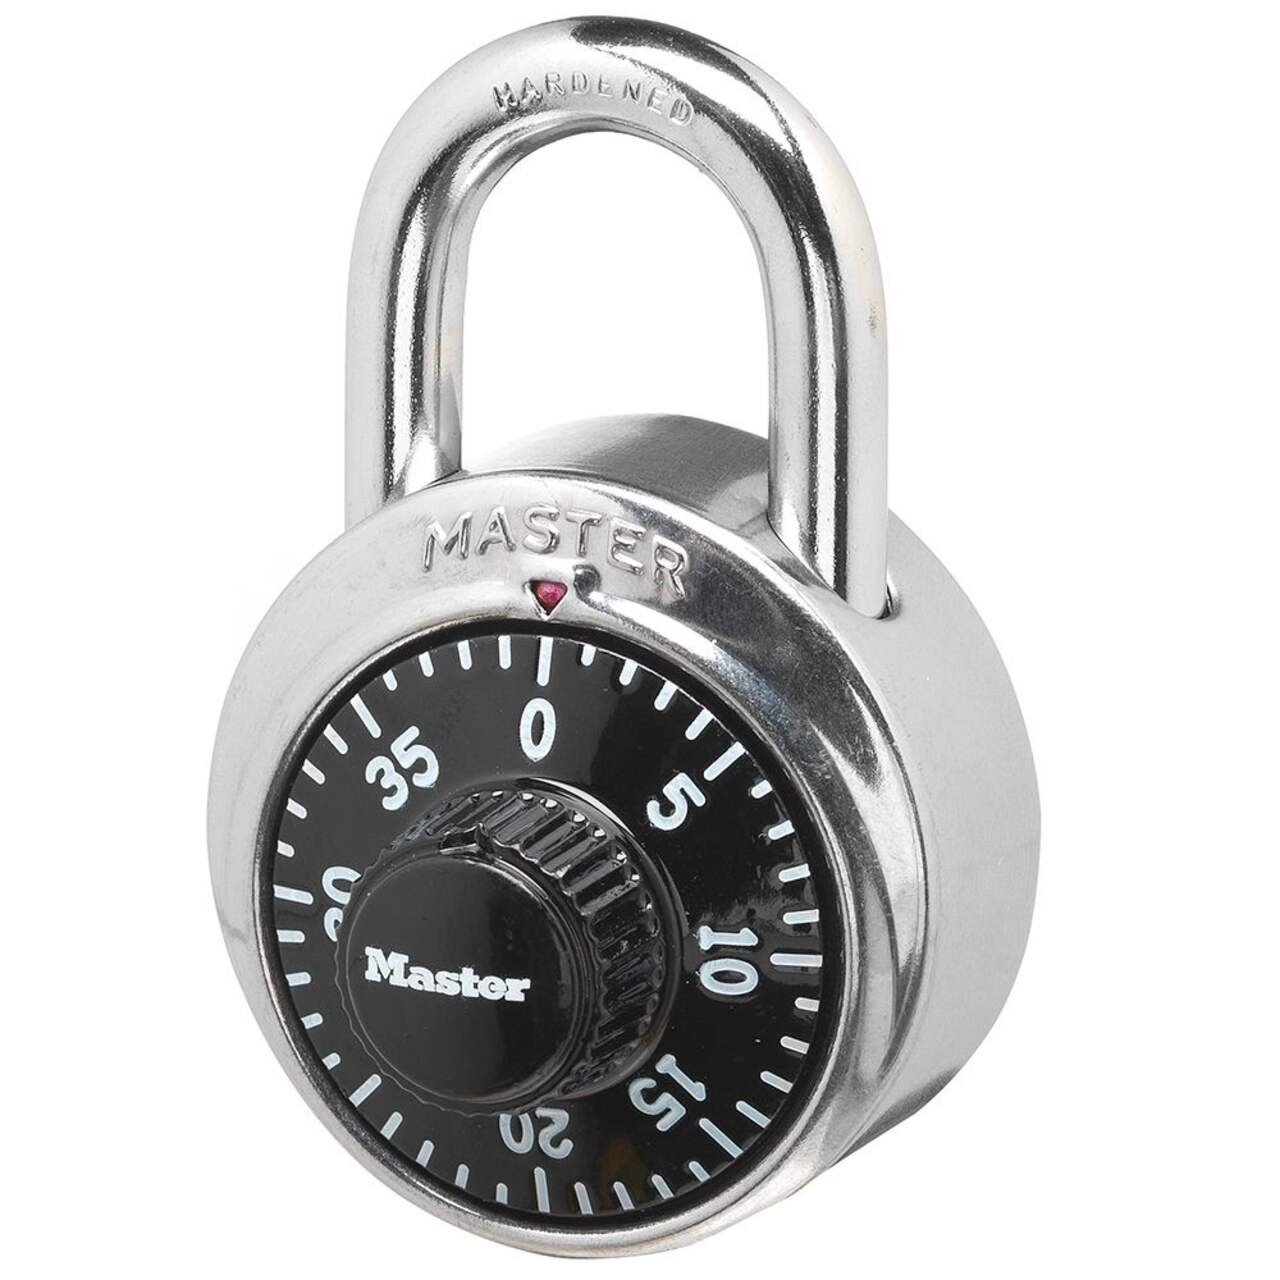 https://media-www.canadiantire.ca/product/fixing/hardware/curb-appeal/0461217/master-combination-padlock-9d5e6961-27f8-4b48-8896-6837d880f79b-jpgrendition.jpg?imdensity=1&imwidth=640&impolicy=mZoom